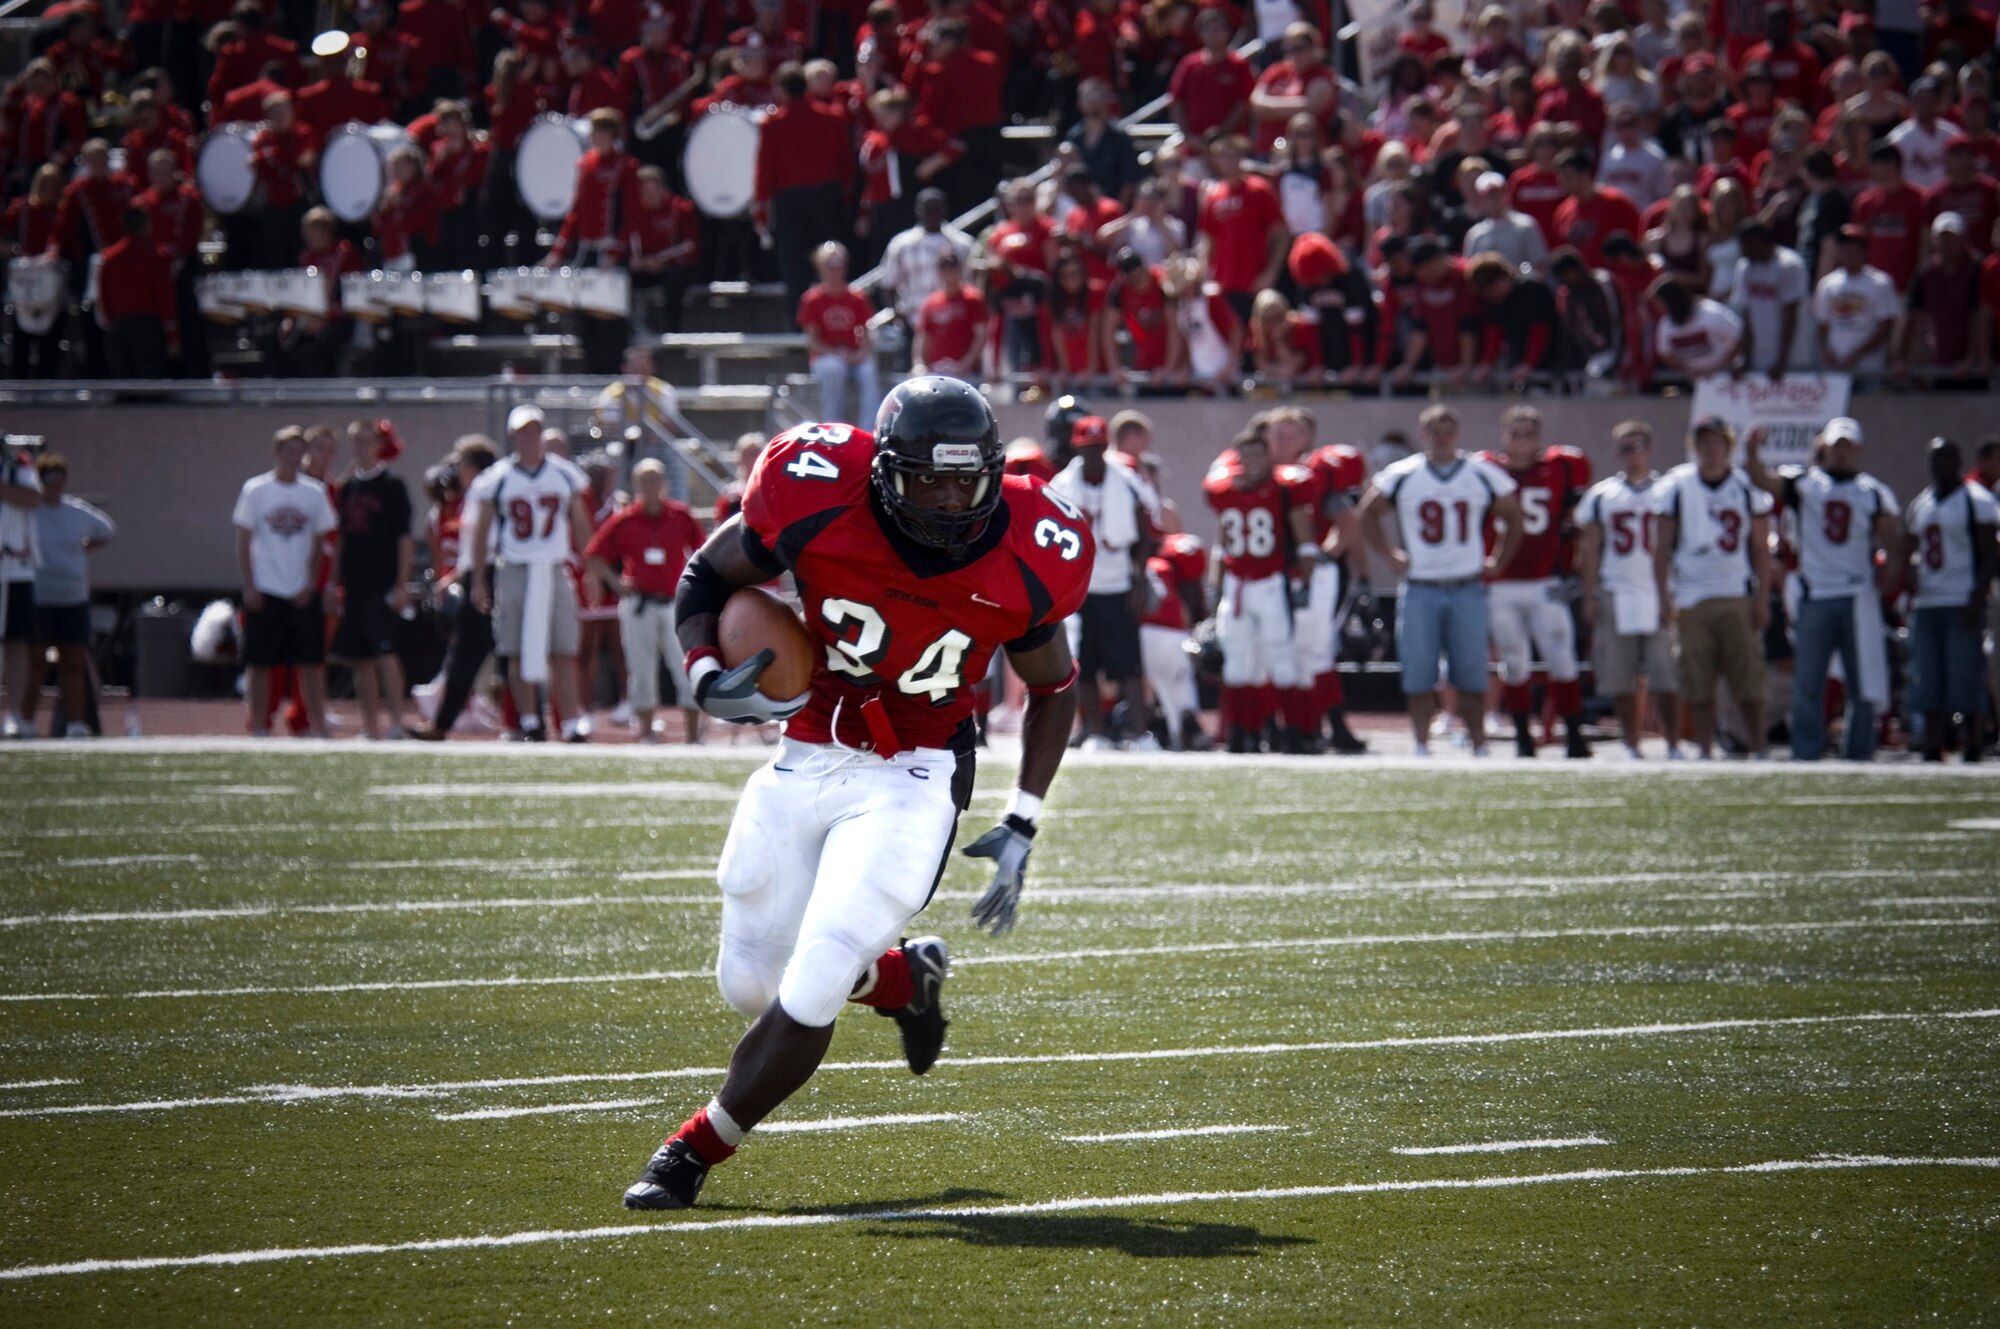 WARRENSBURG, Mo. – The University of Central Missouri’s Glen Milner eyes the defense during the military appreciation day game on campus Sept. 29. Milner rushed 37 times for a career-high 218 yards and four touchdowns. (U.S. Air Force photo/1st Lt. Allen Clark)